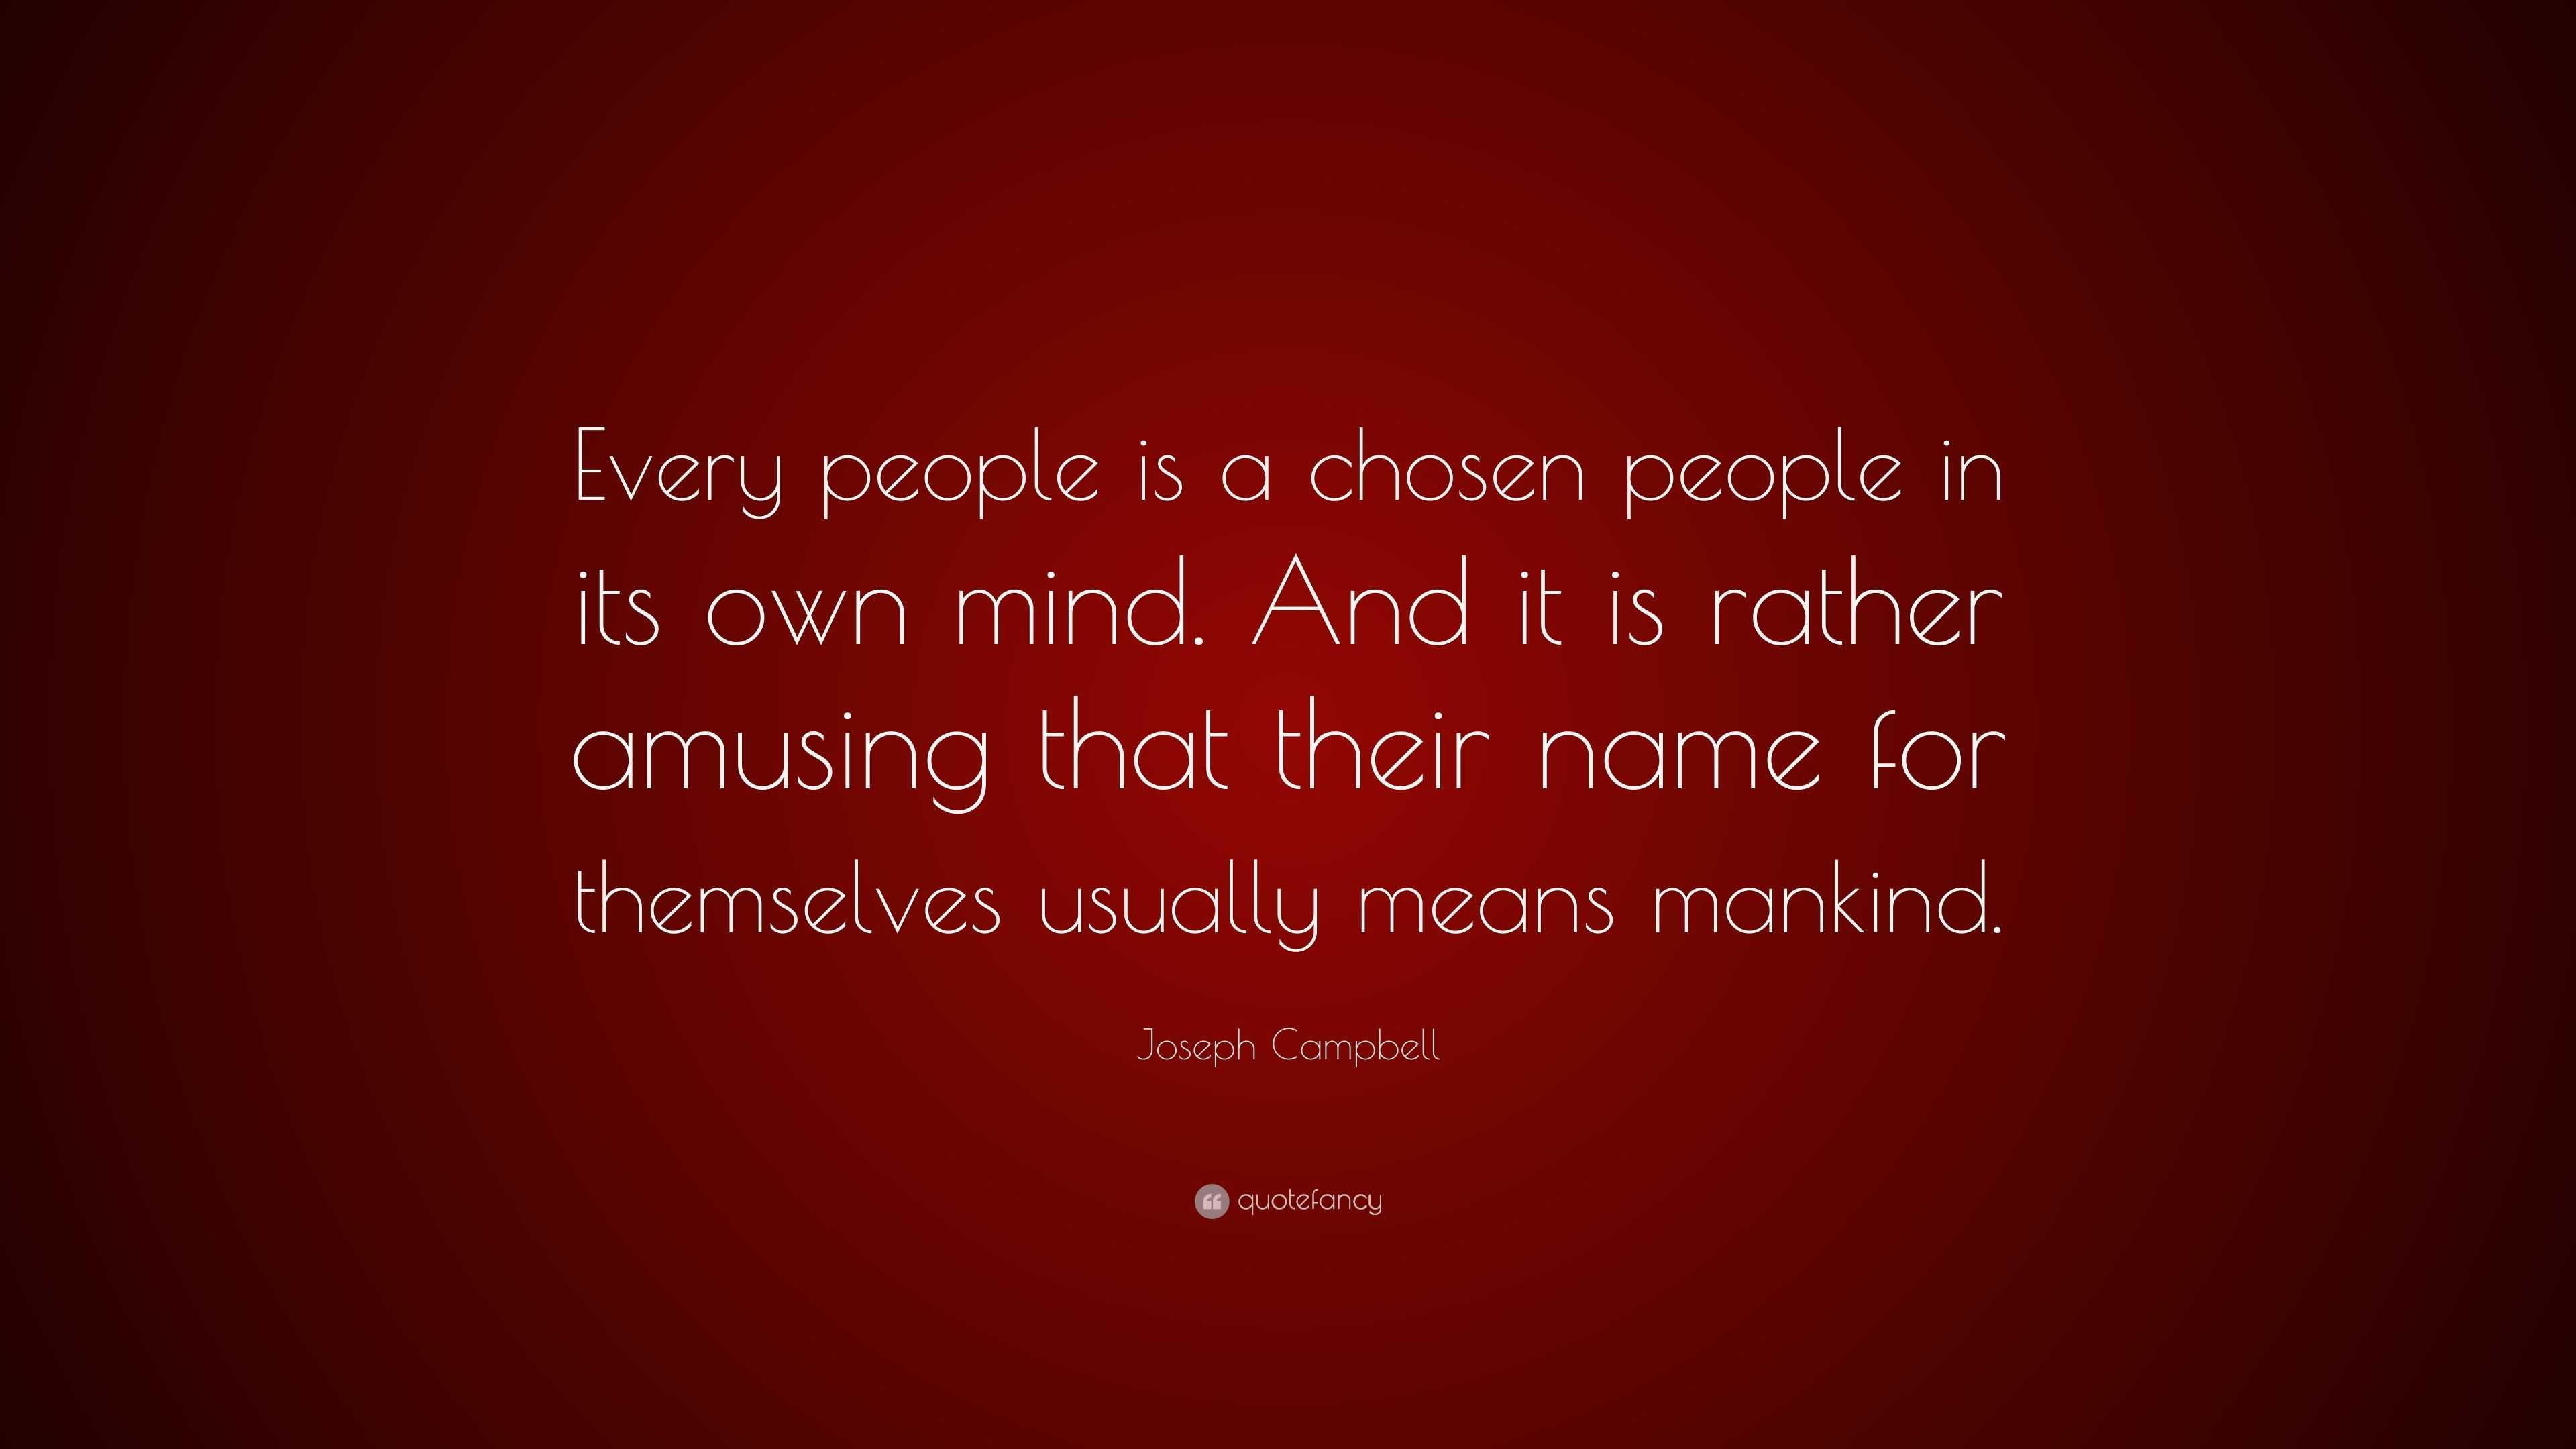 Joseph Campbell Quote: “Every people is a chosen people in its own mind ...